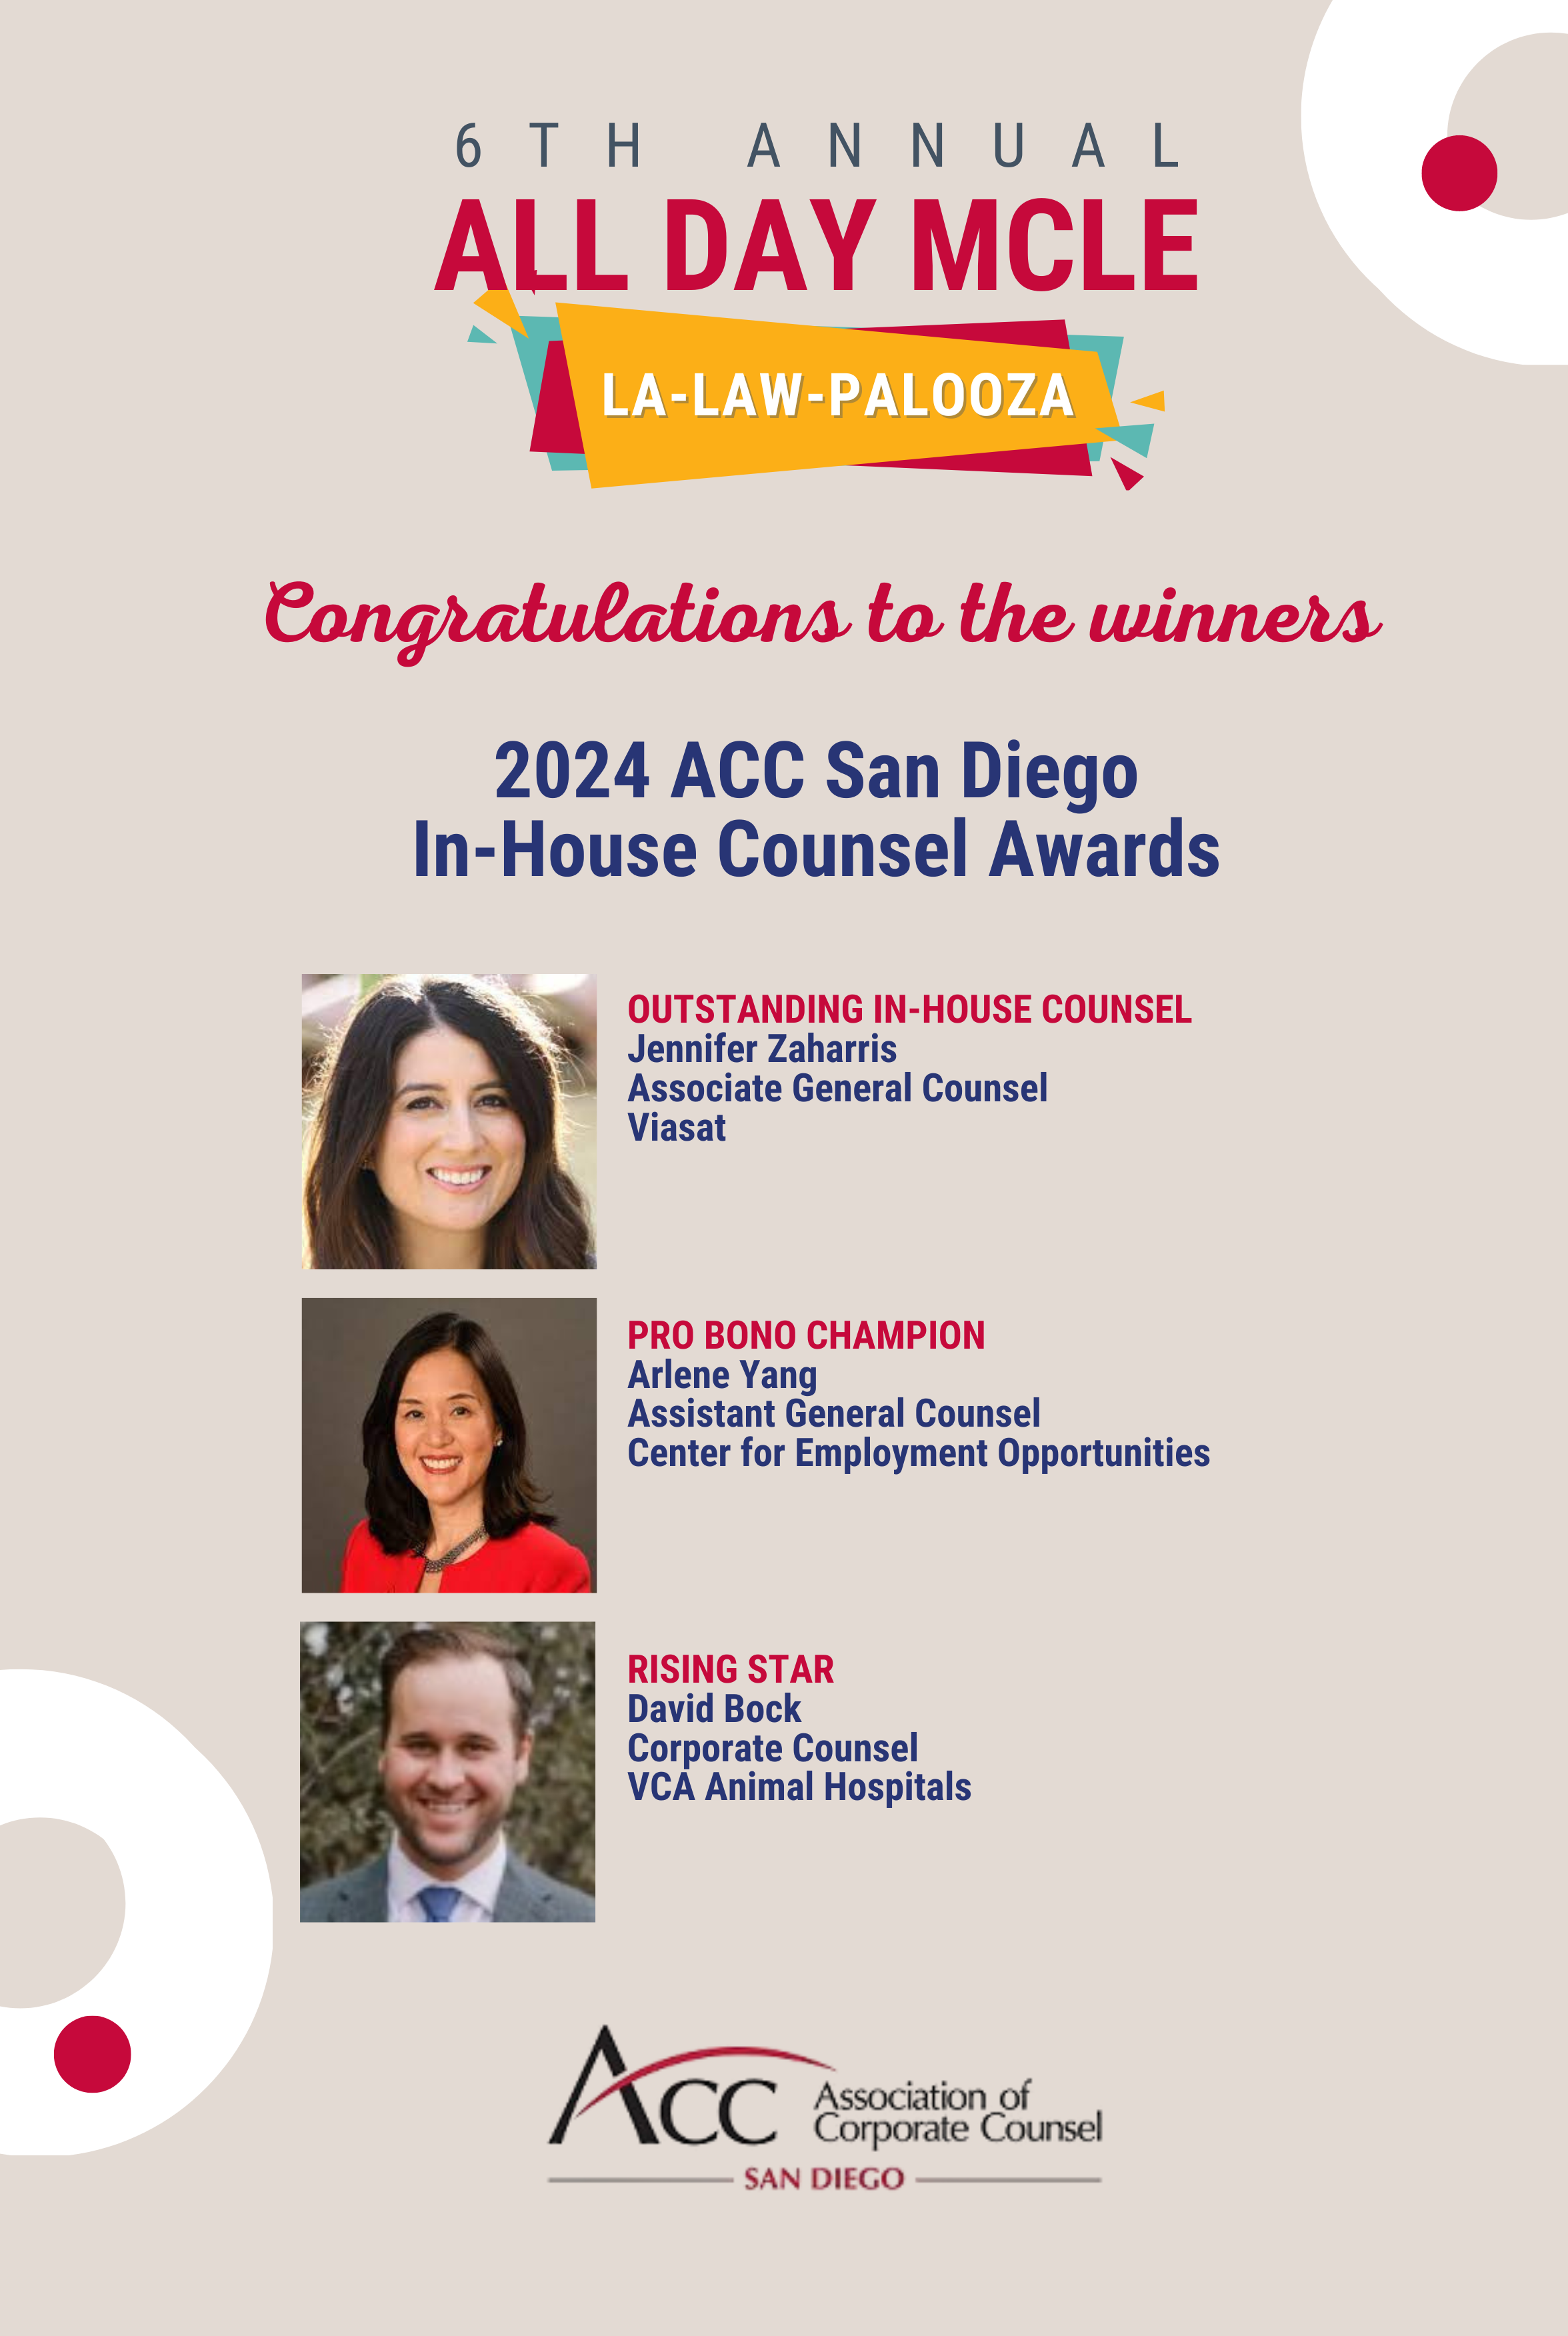 In-House Counsel Awards